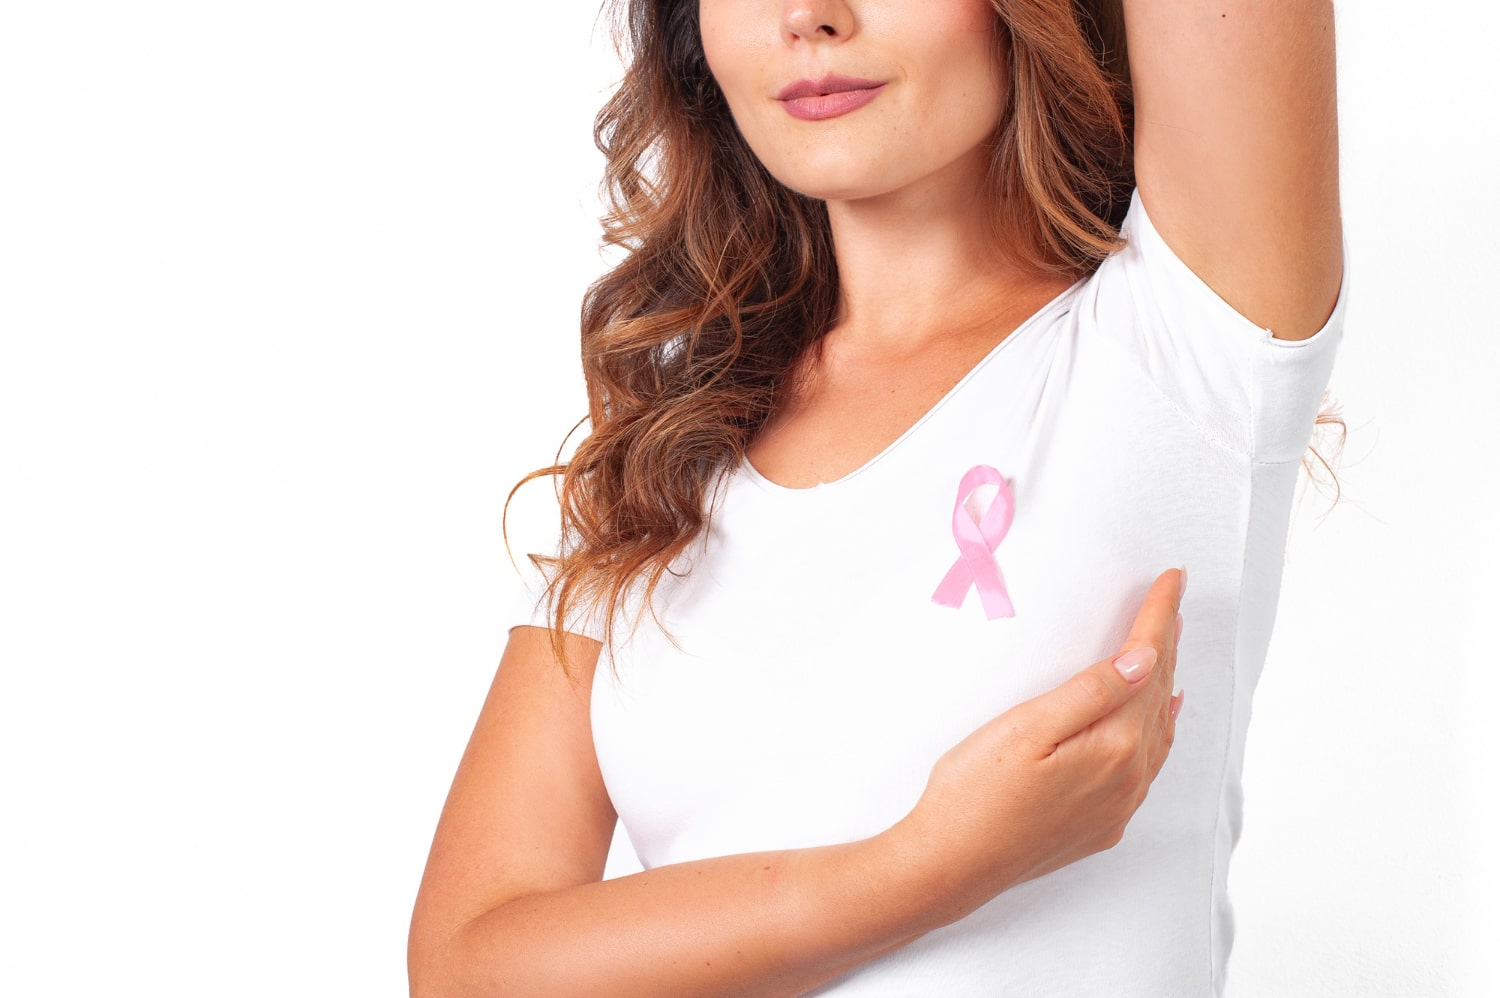 Breast cancer types and symptoms explained